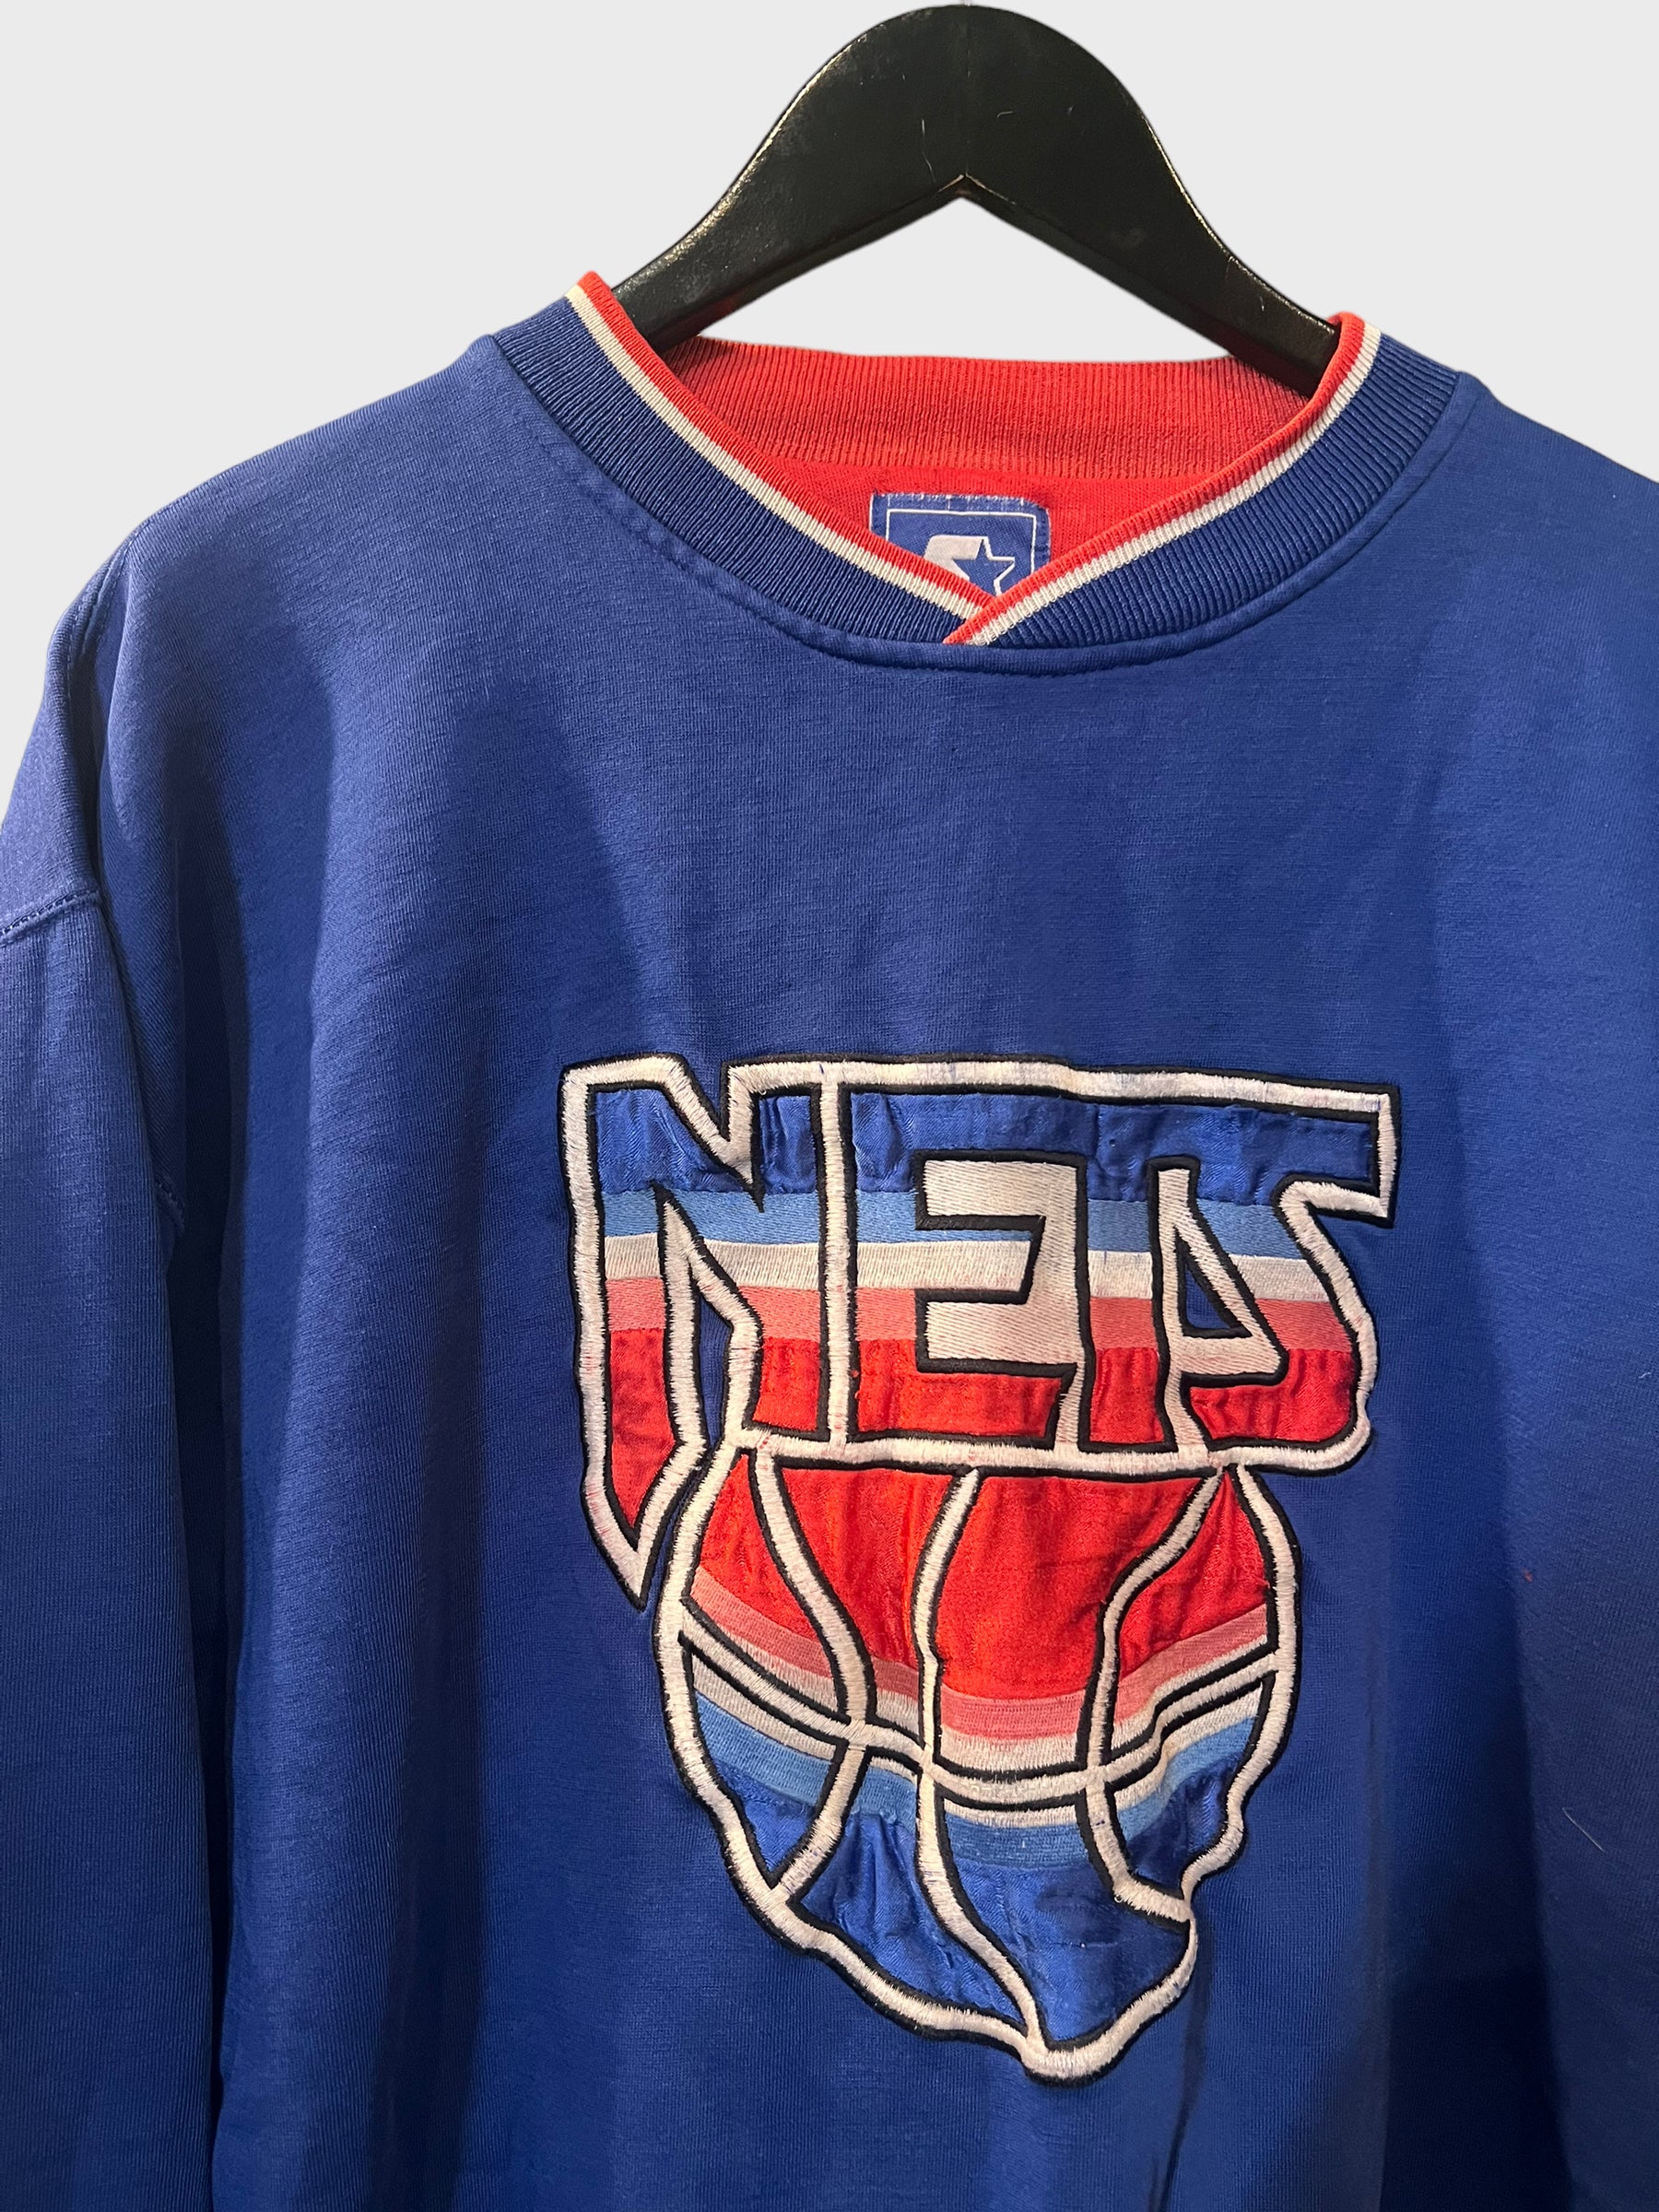 Vintage New Jersey Nets Sweater